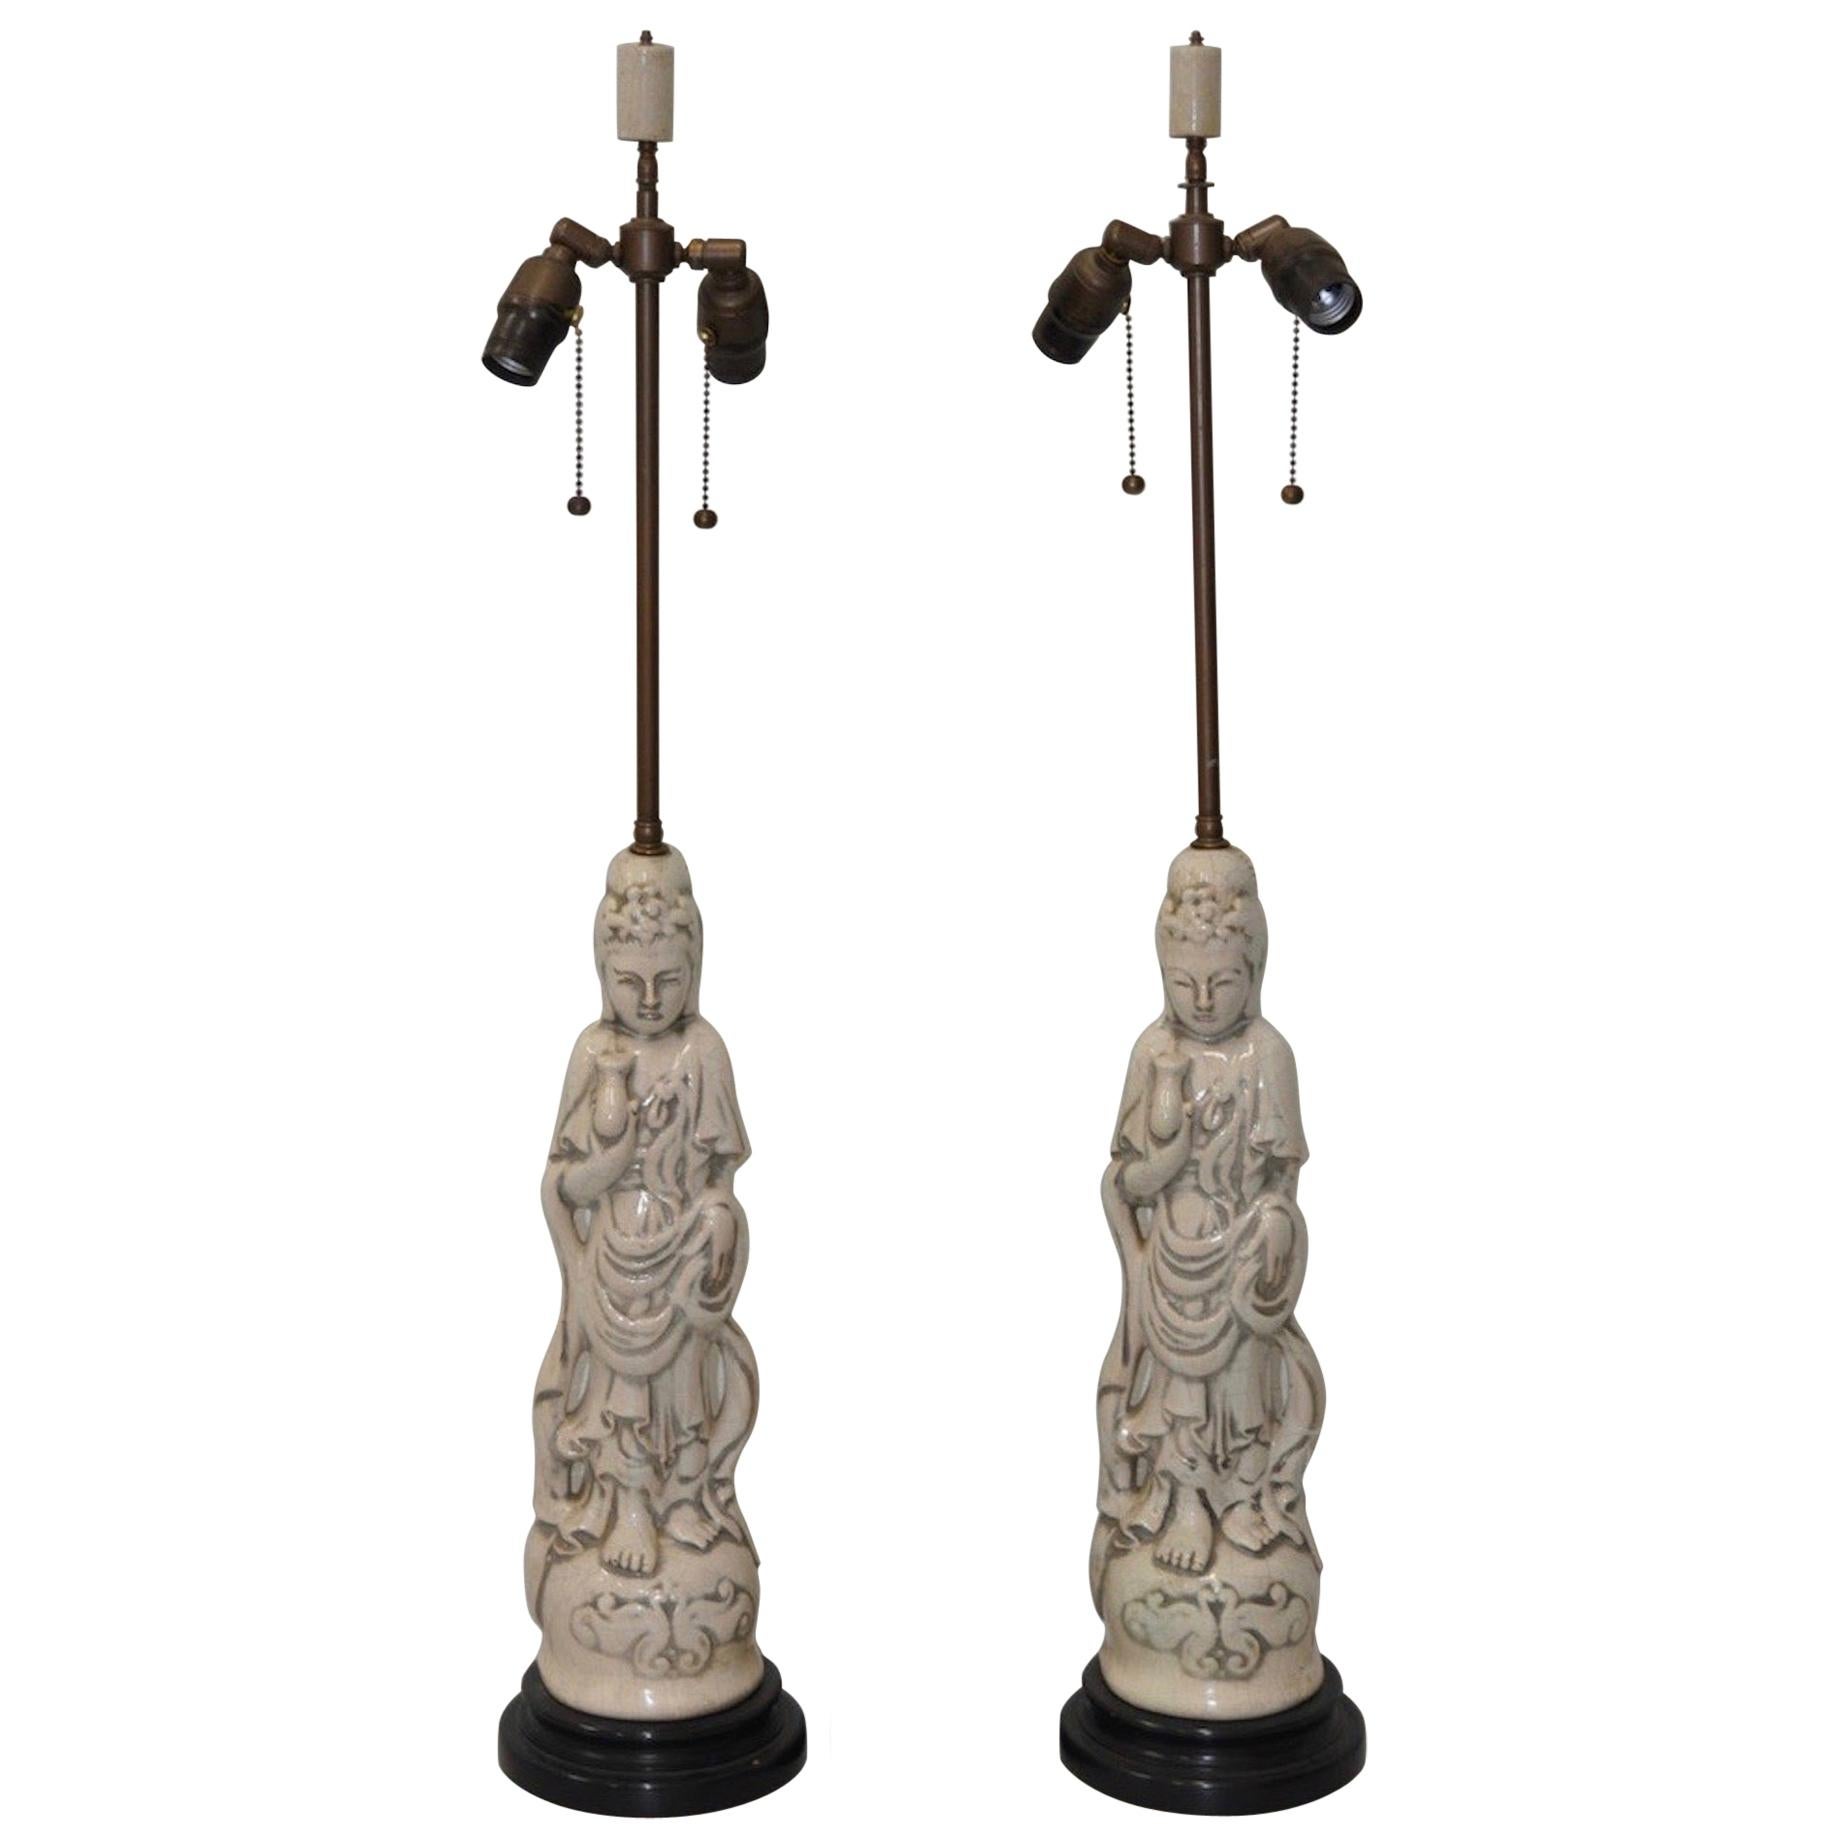 Pair of Mid-Century Modern Blanc de Chine Crackle Glaze Asian Table Lamps For Sale